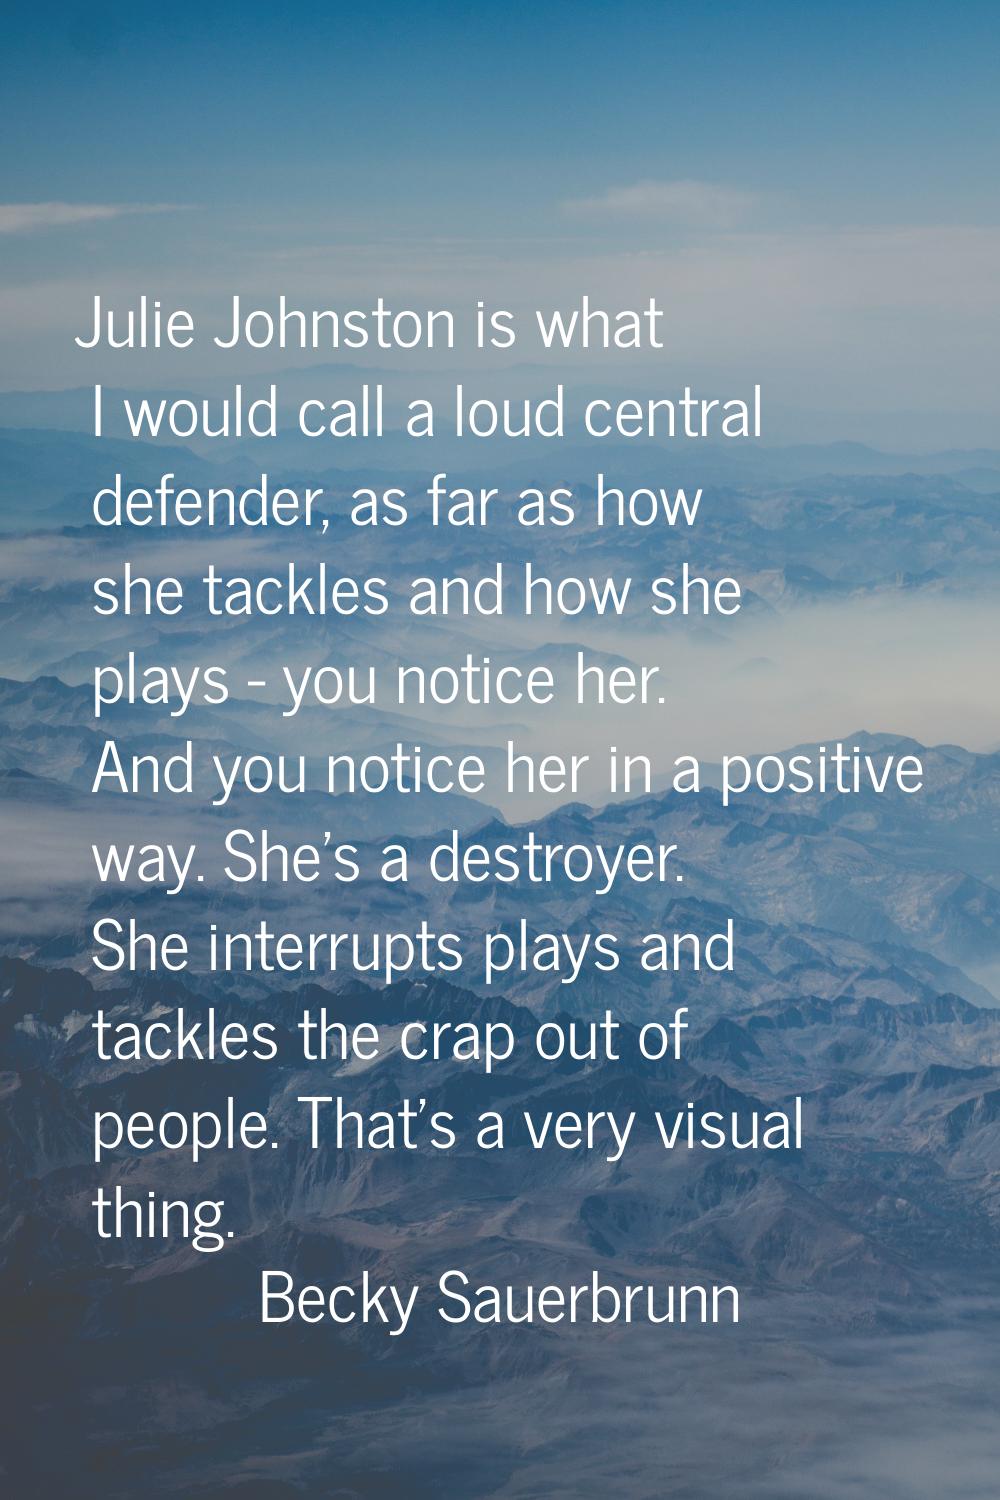 Julie Johnston is what I would call a loud central defender, as far as how she tackles and how she 